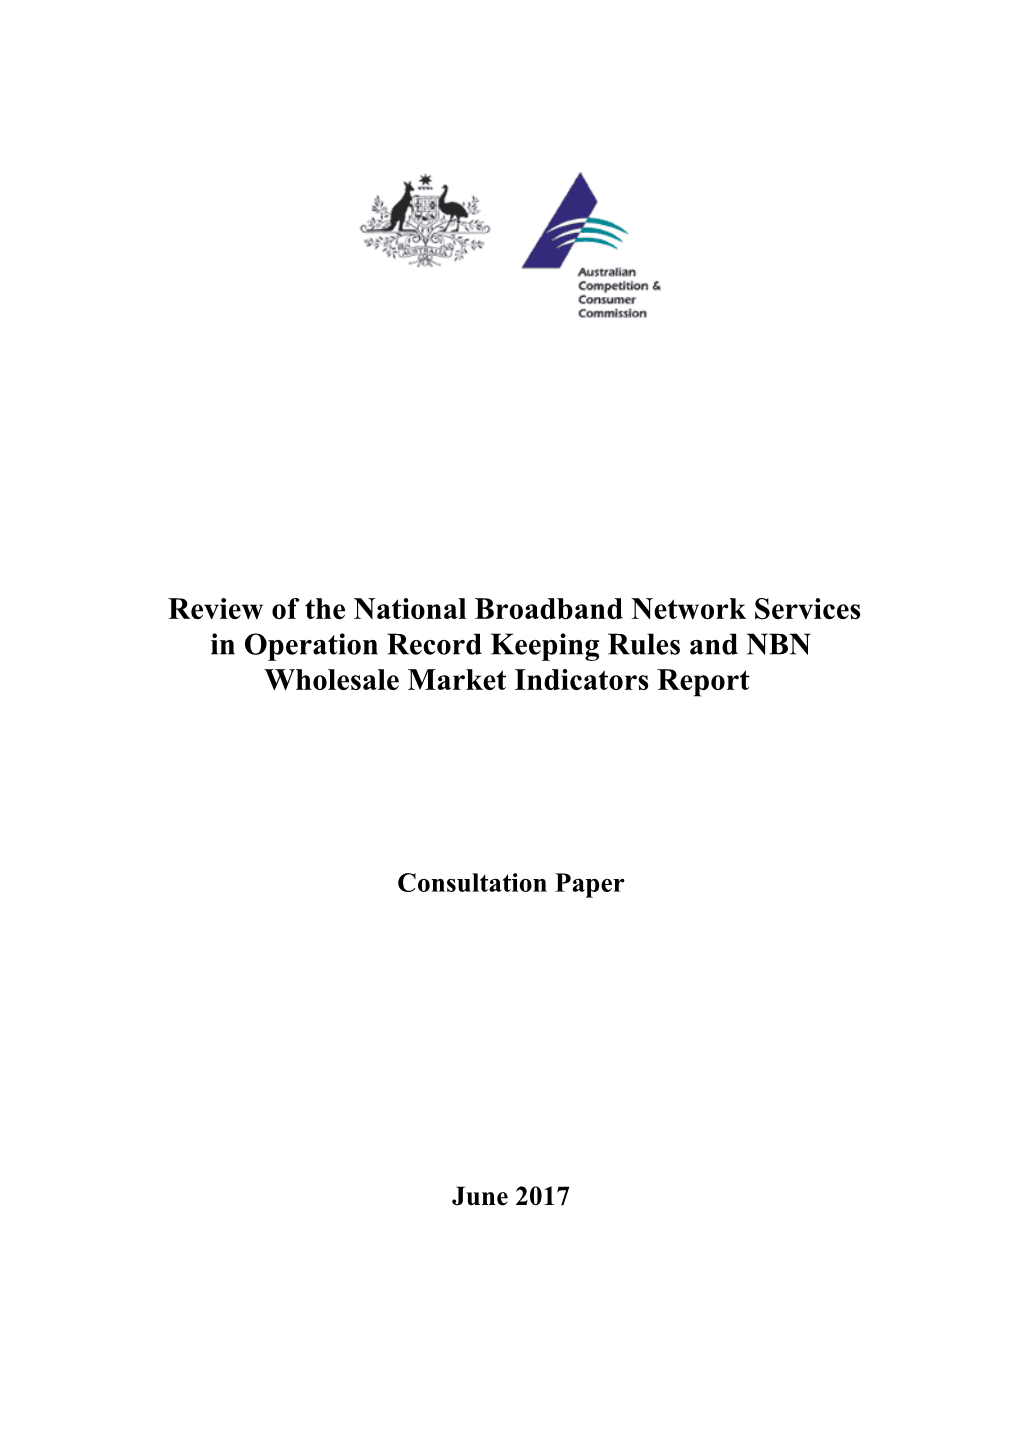 Review of the National Broadband Network Services in Operation Record Keeping Rules And